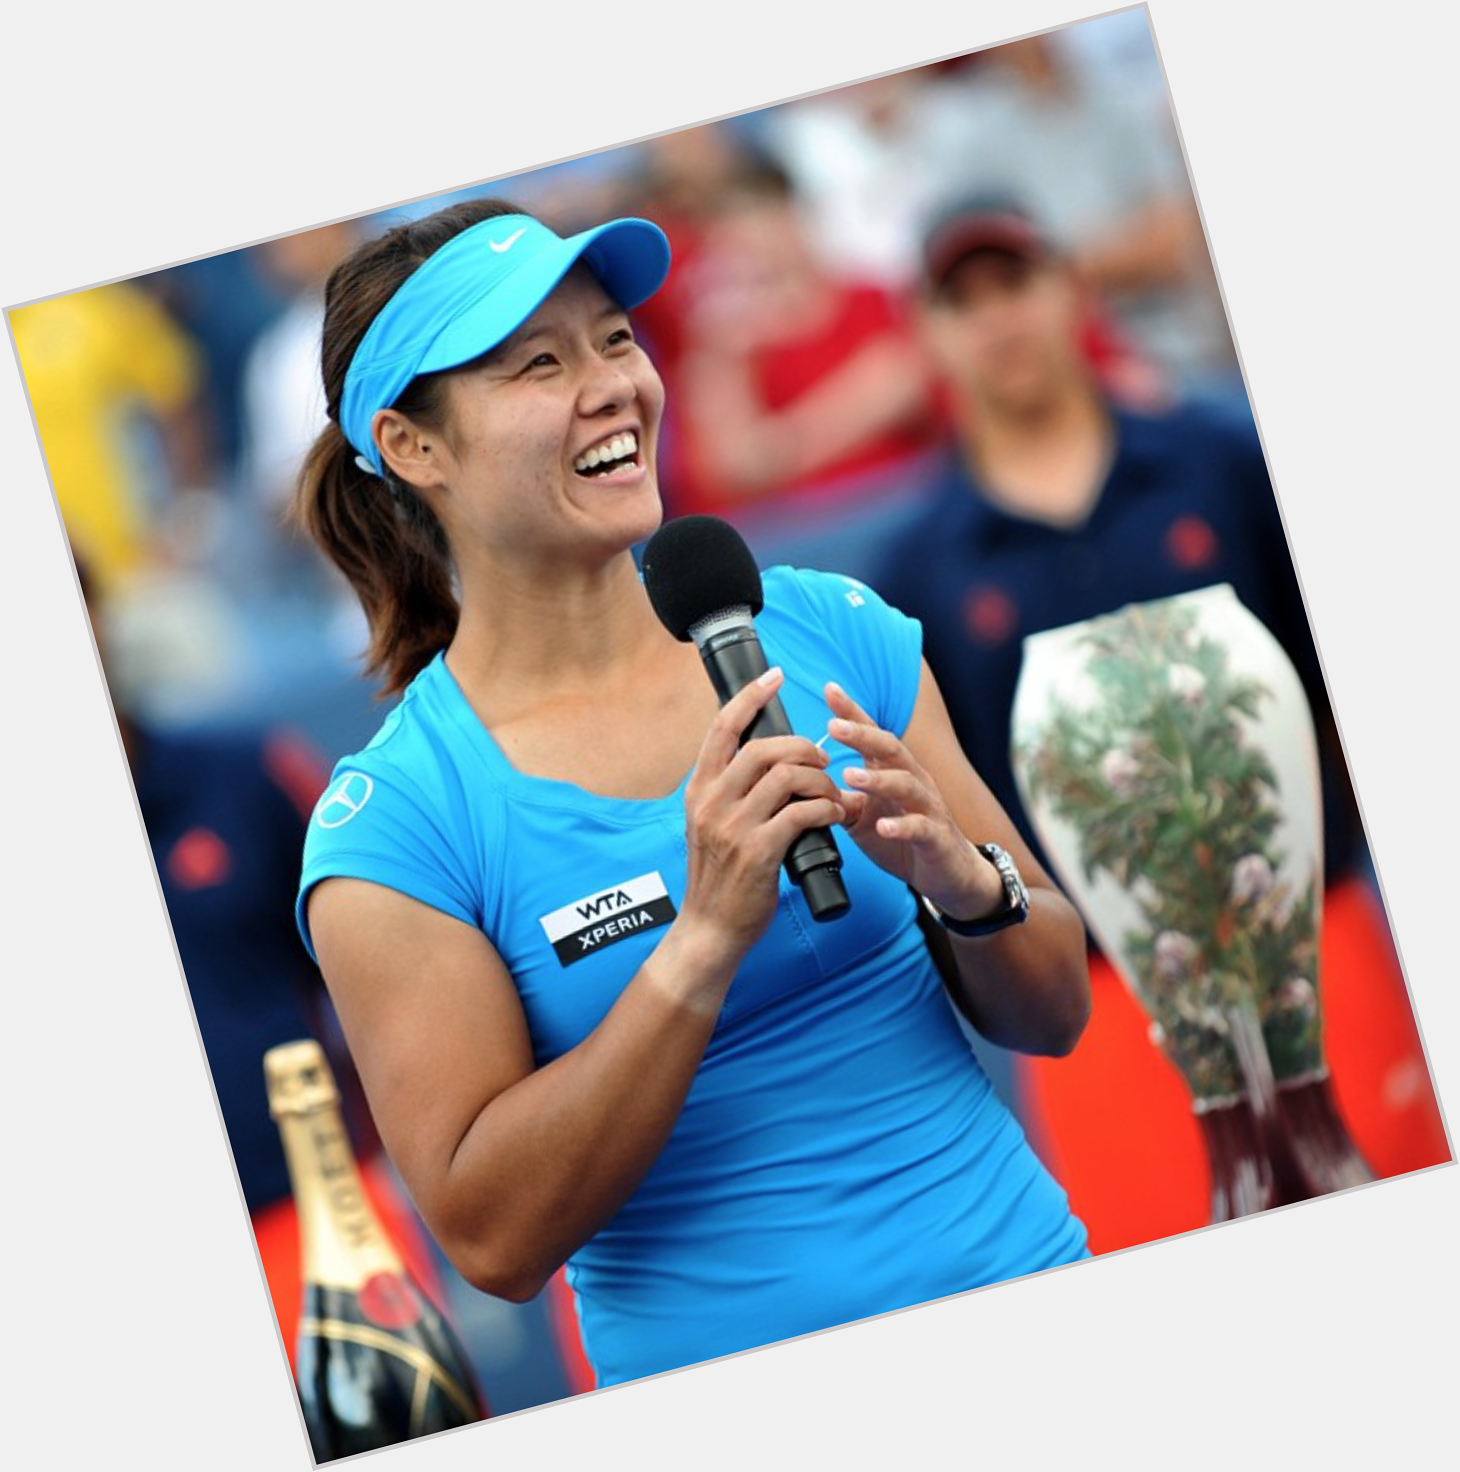 Happy Birthday to our 2012 champ Li Na! Wishing her and her growing family all the best. 